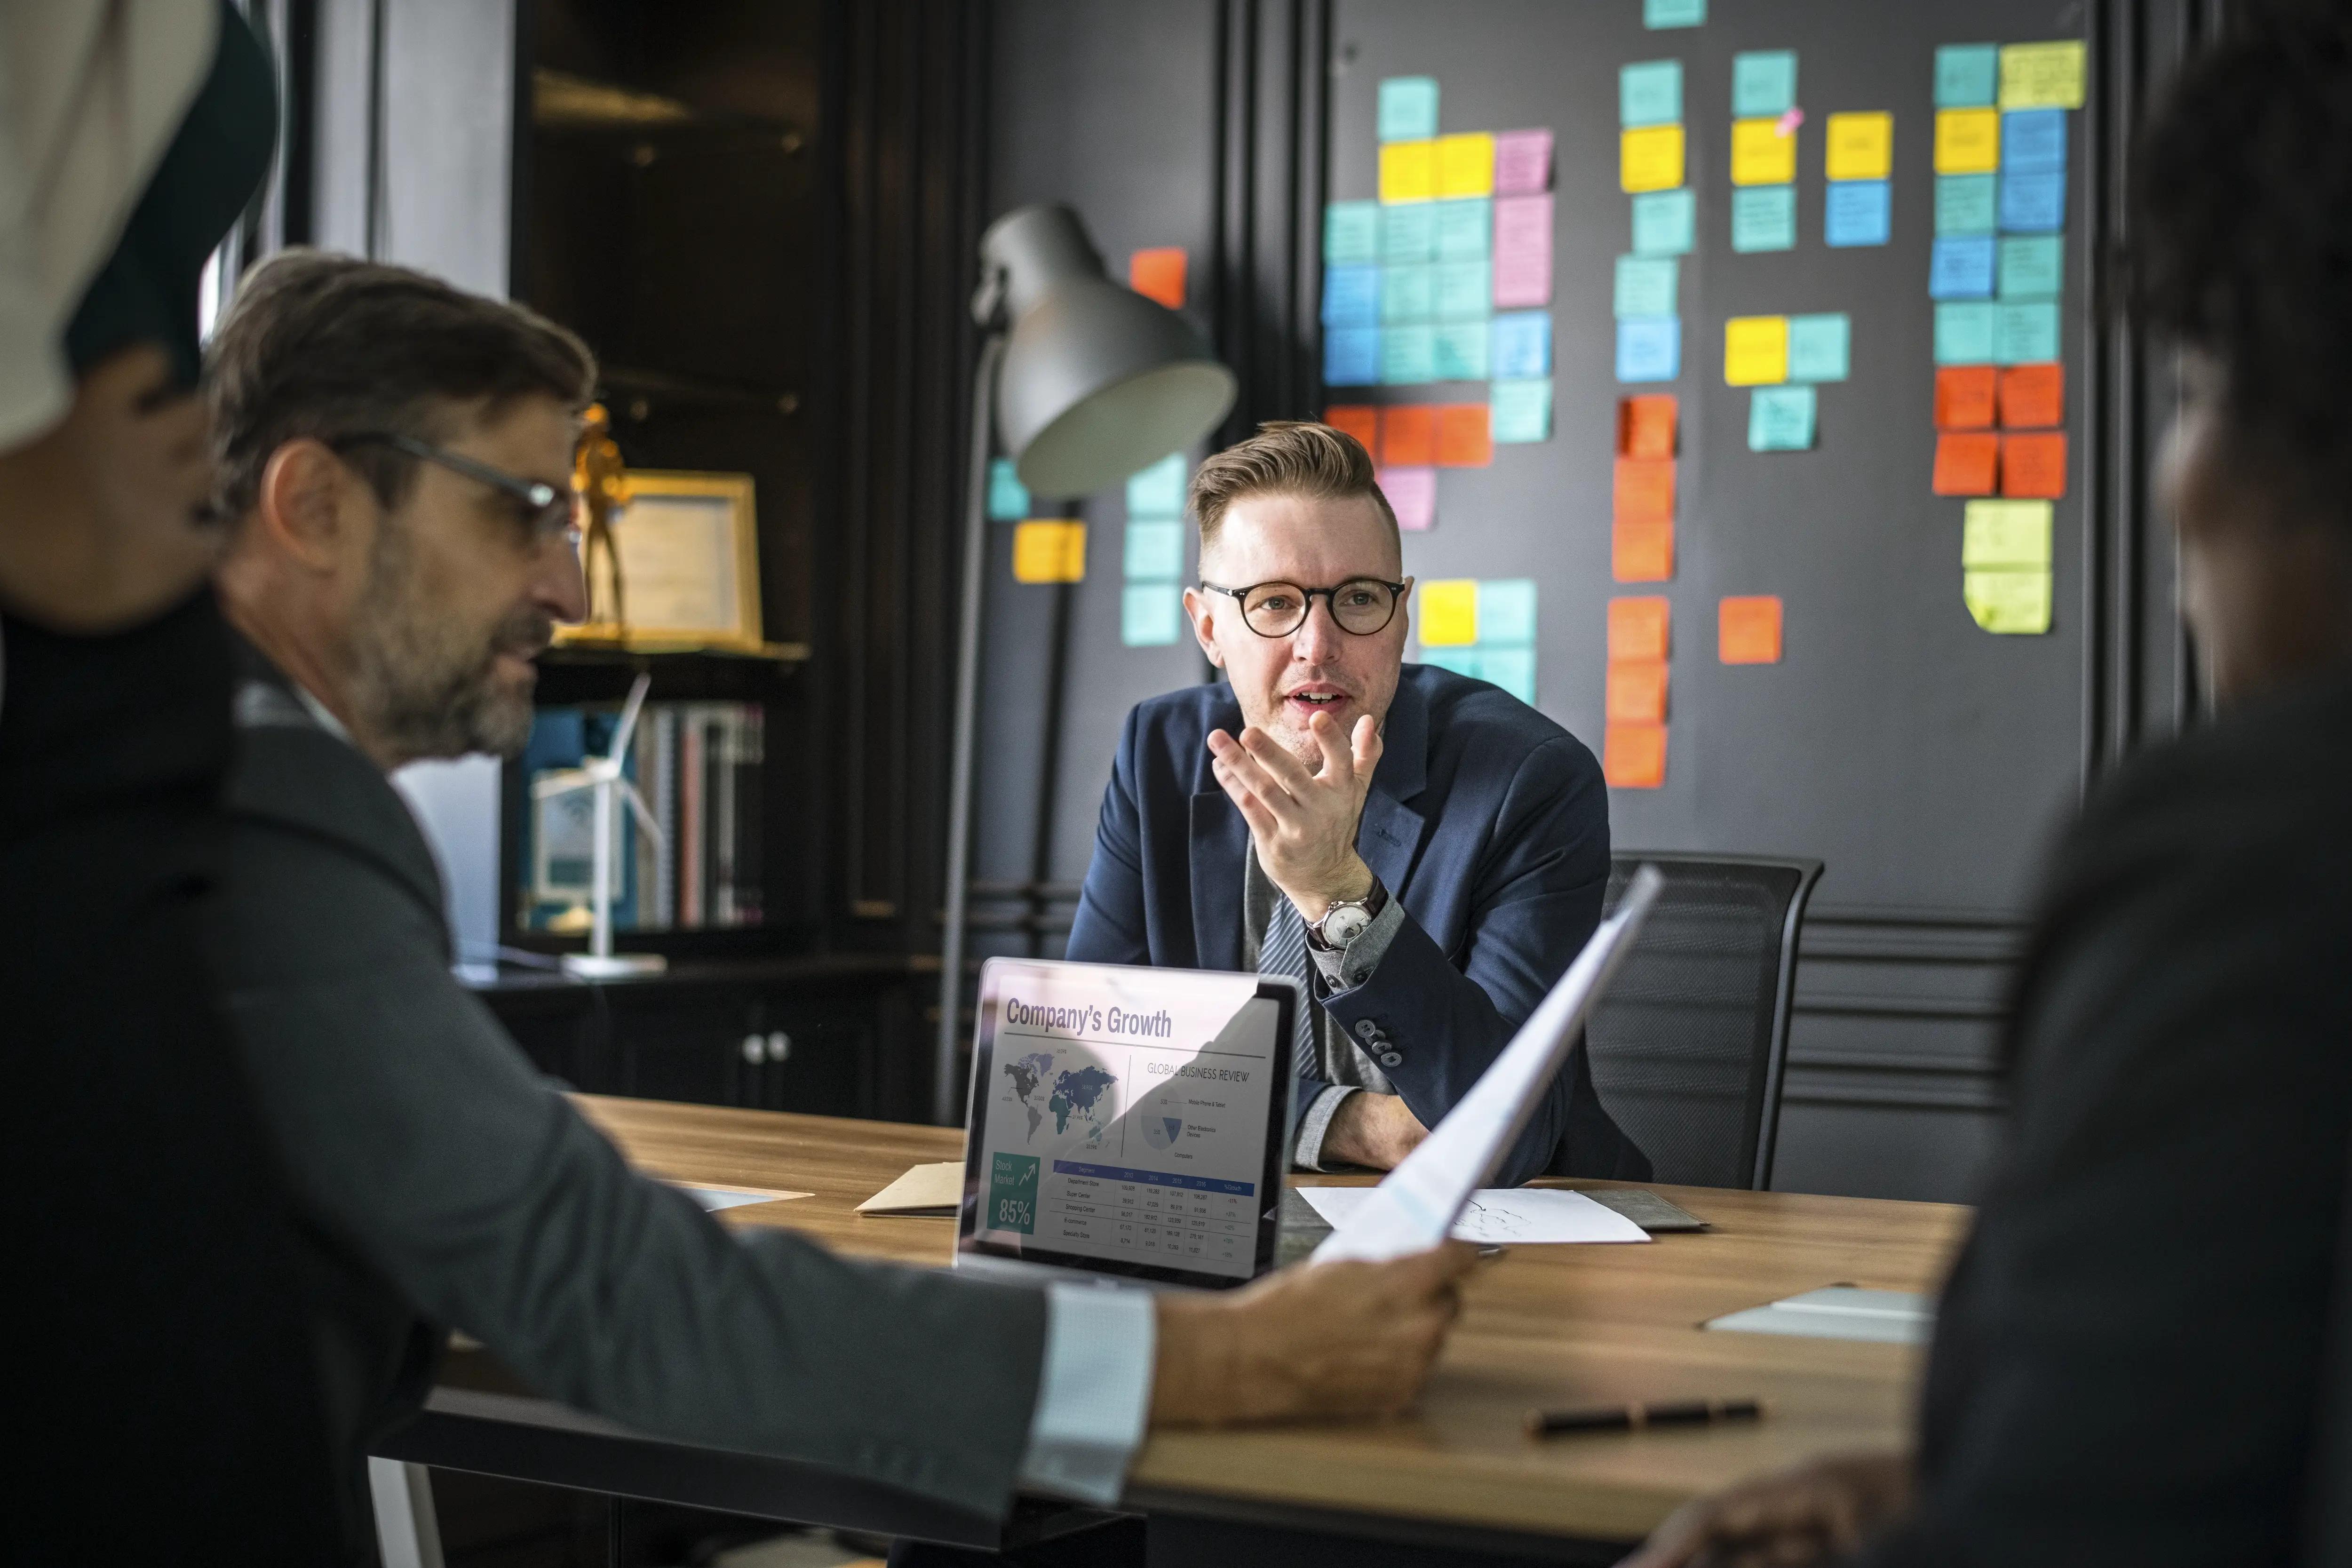 Engaged business team in a strategic meeting, with focus on a male leader explaining growth concepts, accompanied by colorful sticky notes on a board in a well-lit modern office setting.